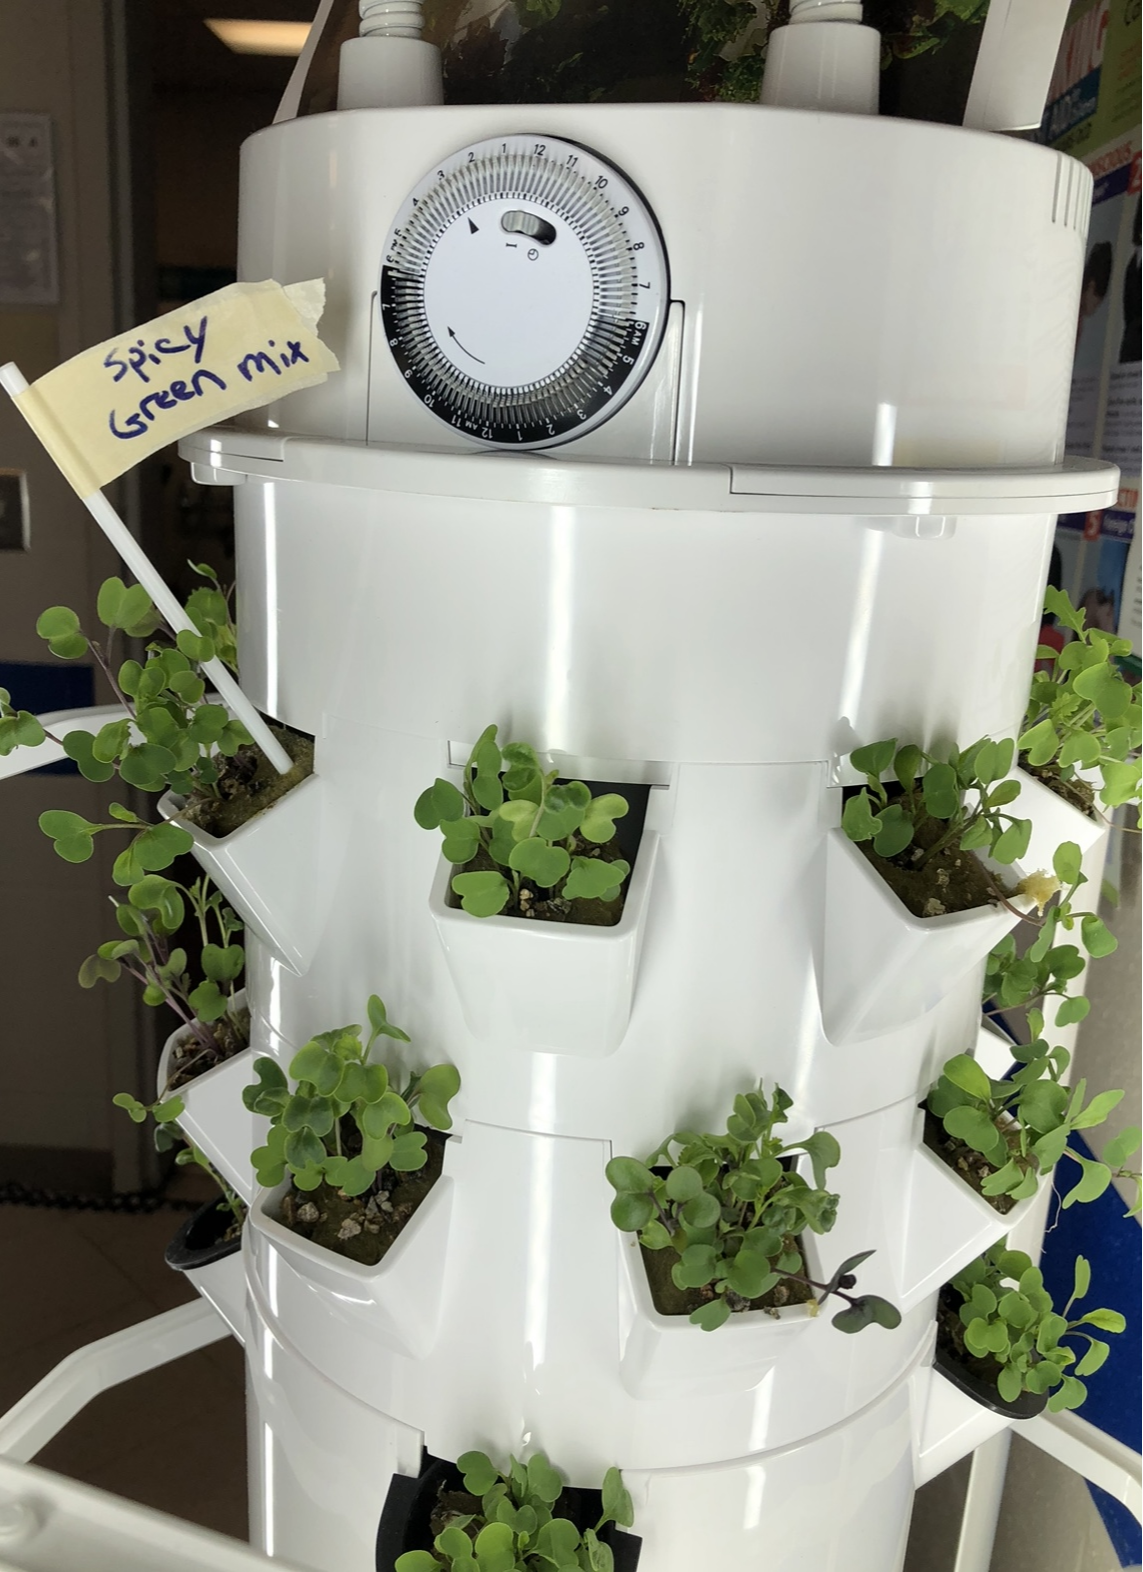 Grow Towers in all school kitchens with HMI grant!